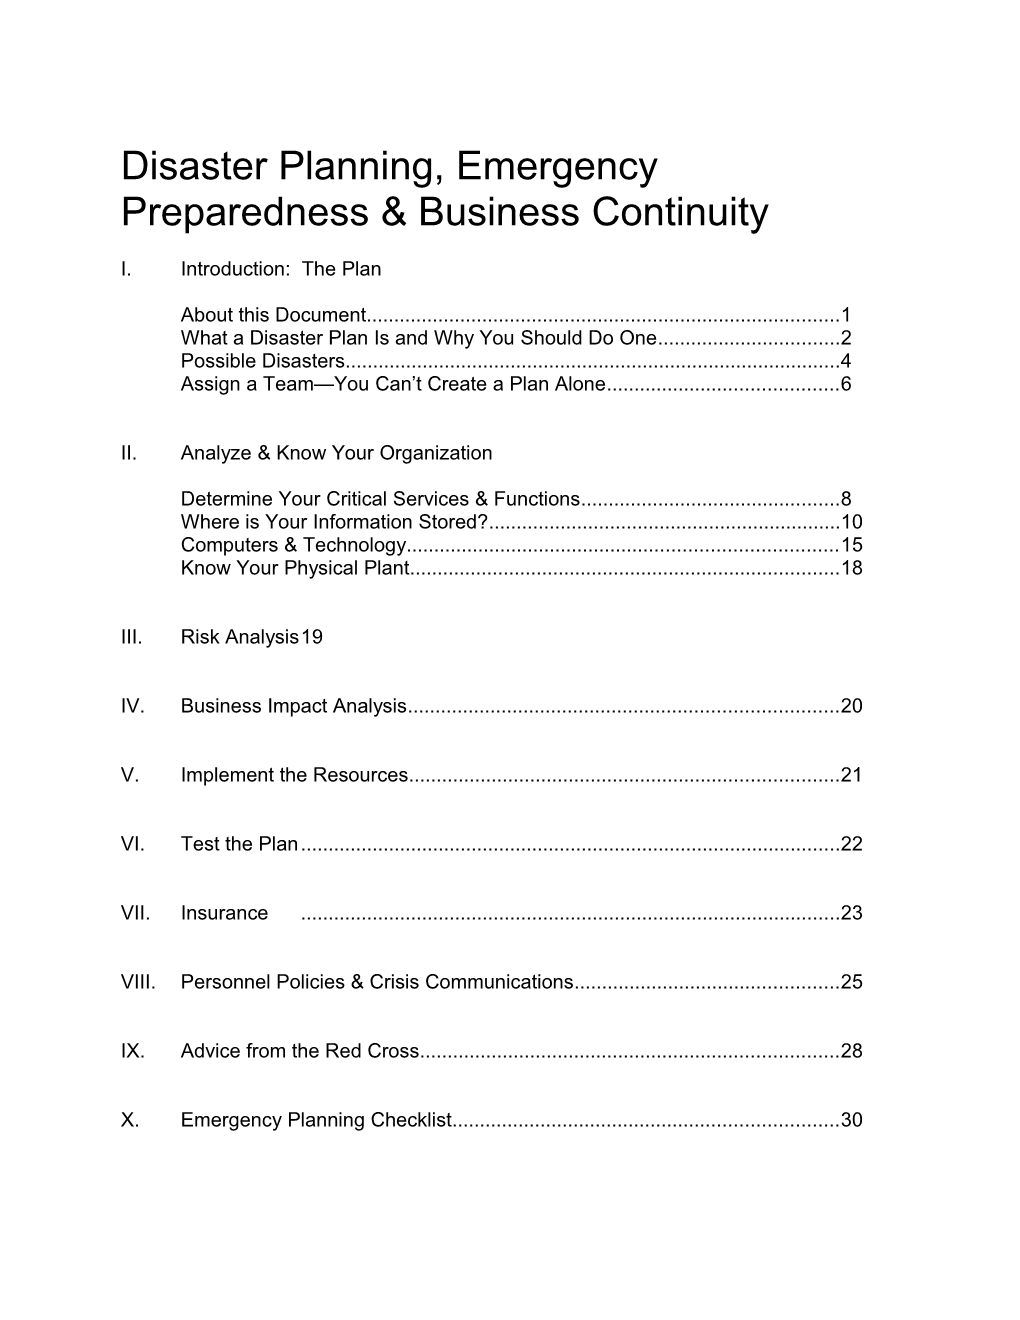 Disaster Planning, Emergency Preparedness & Business Continuity